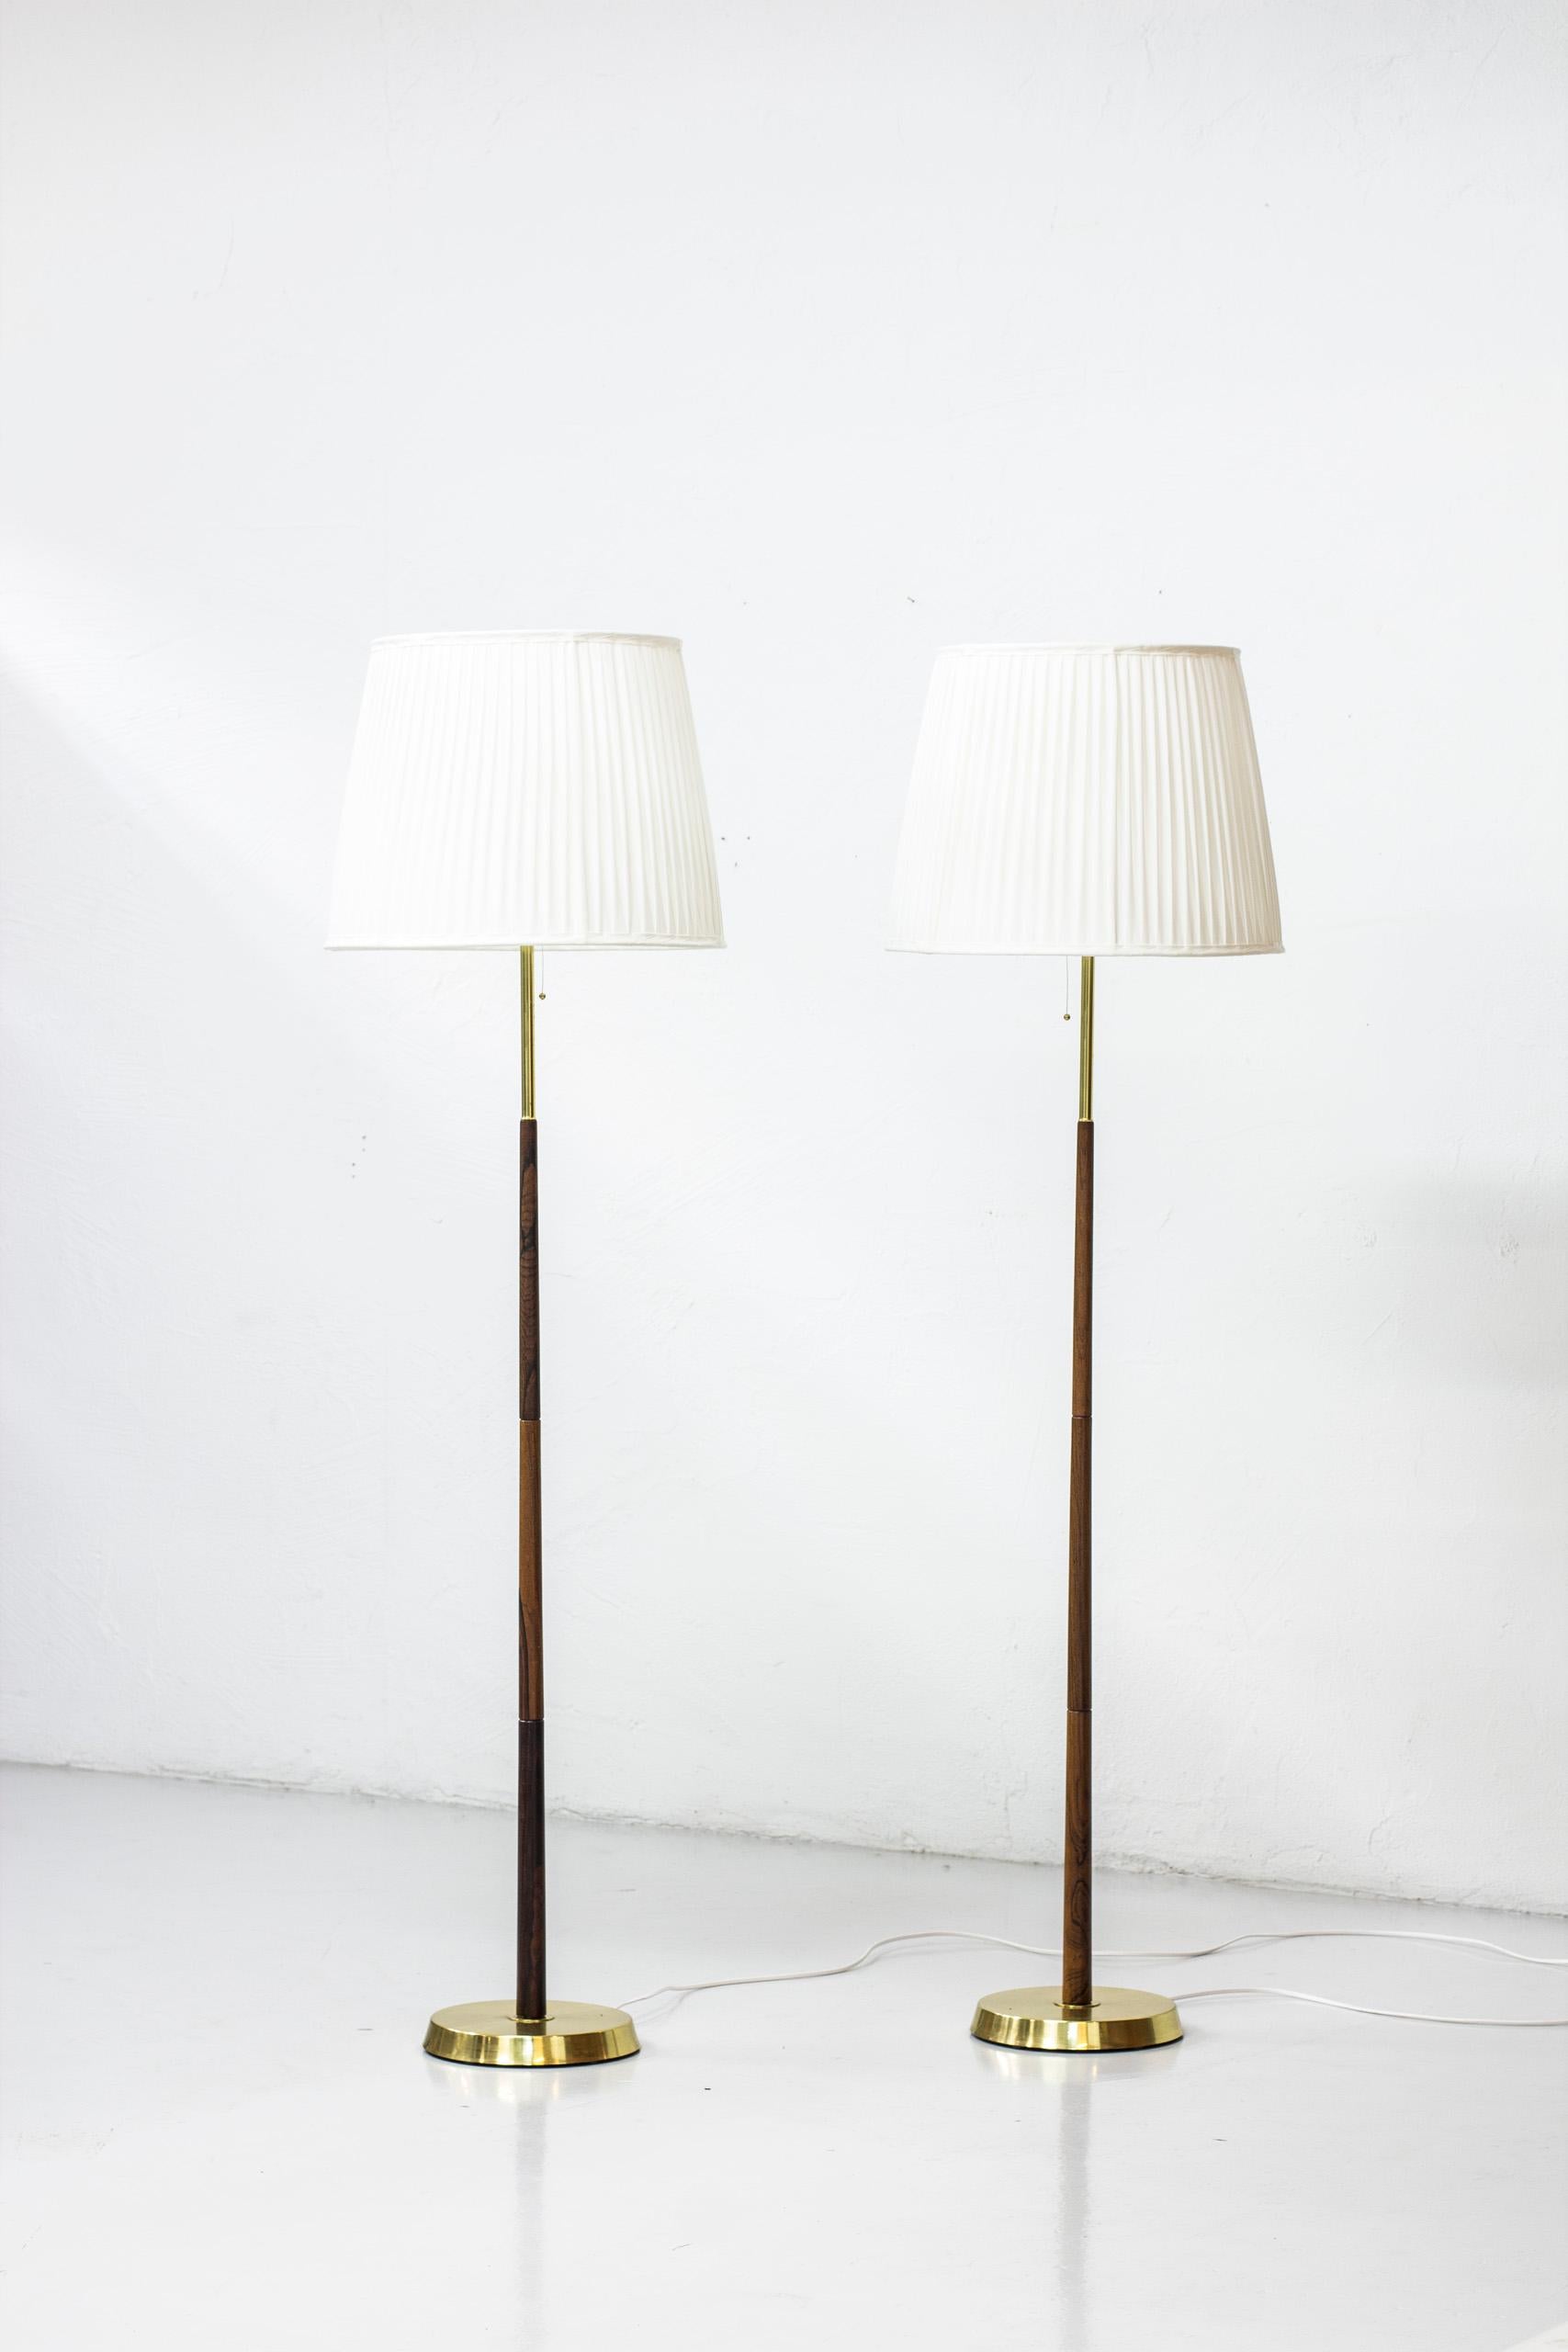 Pair of floor lamps produced in Sweden by Möller Armaturer. Made during the 1960s. Made from polished brass and walnut. New hand pleated chintz fabric shades. Very good vintage condition with light age related wear and patina.

 

Price for the pair